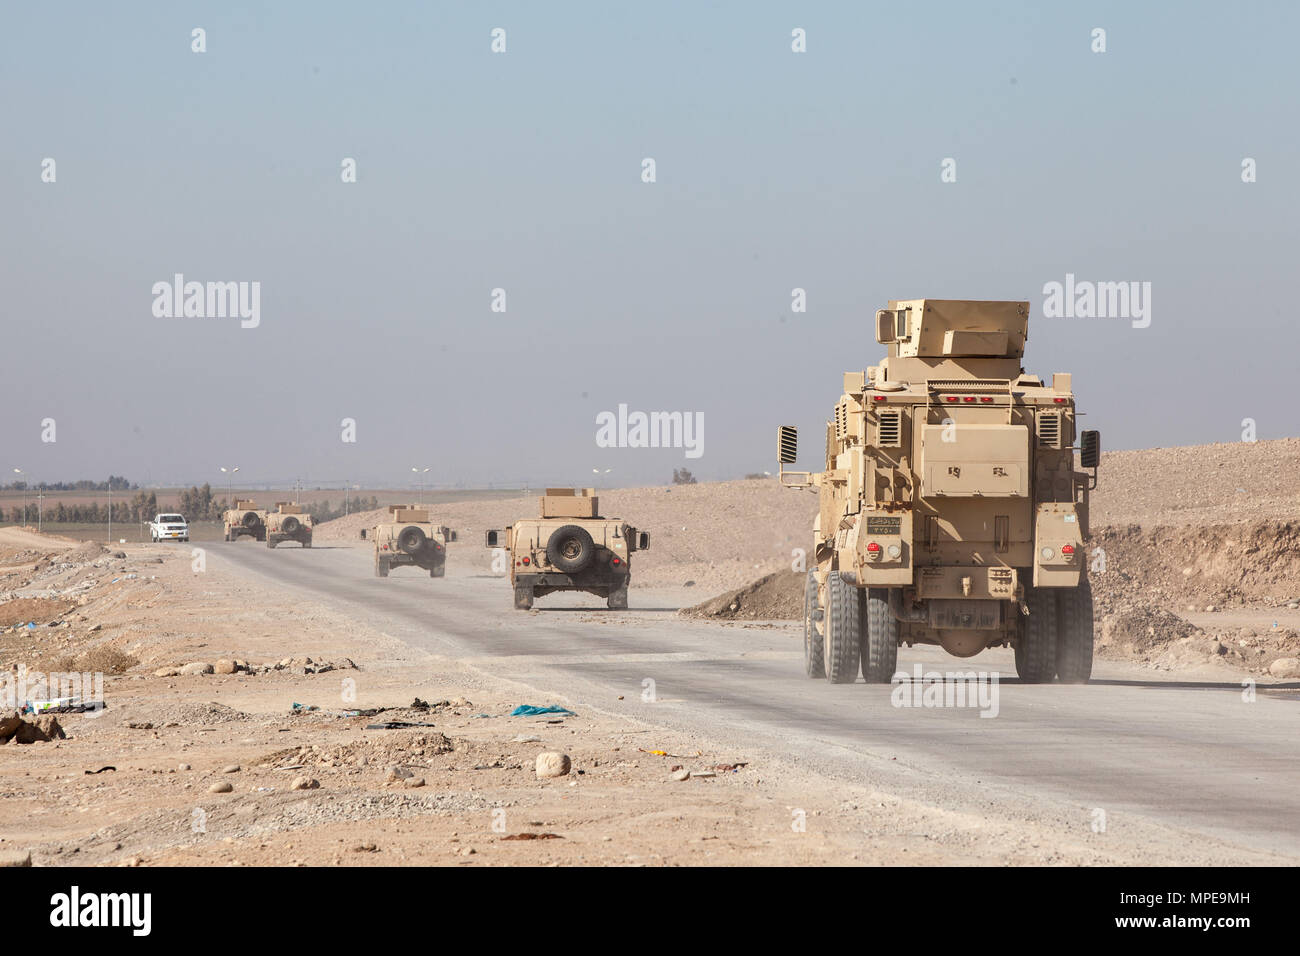 Peshmerga soldiers drive Humvees and a MaxxPro mine resistant, ambush-protected vehicle in a convoy as part of driver’s training provided by German soldiers near Erbil, Iraq, Feb. 8, 2017. More than 60 Coalition partners have committed themselves to the goal of eliminating the threat posed by ISIL in Iraq and Syria and have contributed in various capacities to the effort. Combined Joint Task Force – Inherent Resolve is the global Coalition to defeat ISIL in Iraq and Syria. (U.S. Army photo by Sgt. Josephine Carlson) Stock Photo